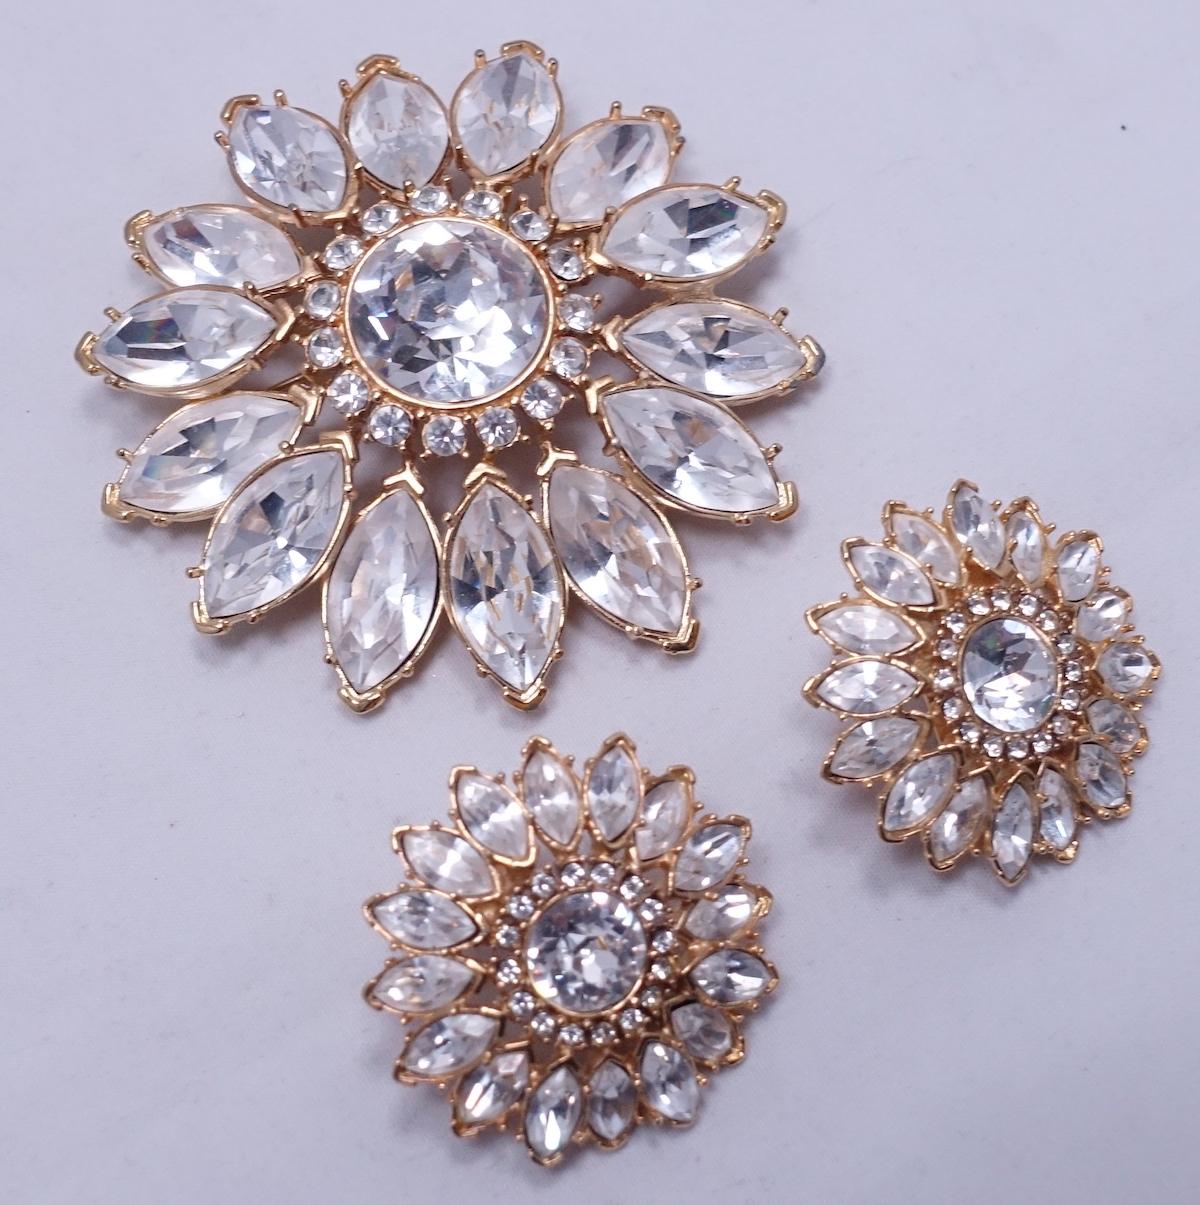 This vintage Monet set features clear crystals in a gold tone setting.  The brooch measures 2-3/4” in diameter and the matching clip earrings measure 1-1/4”.  It is signed “Monet” and it is in excellent condition.